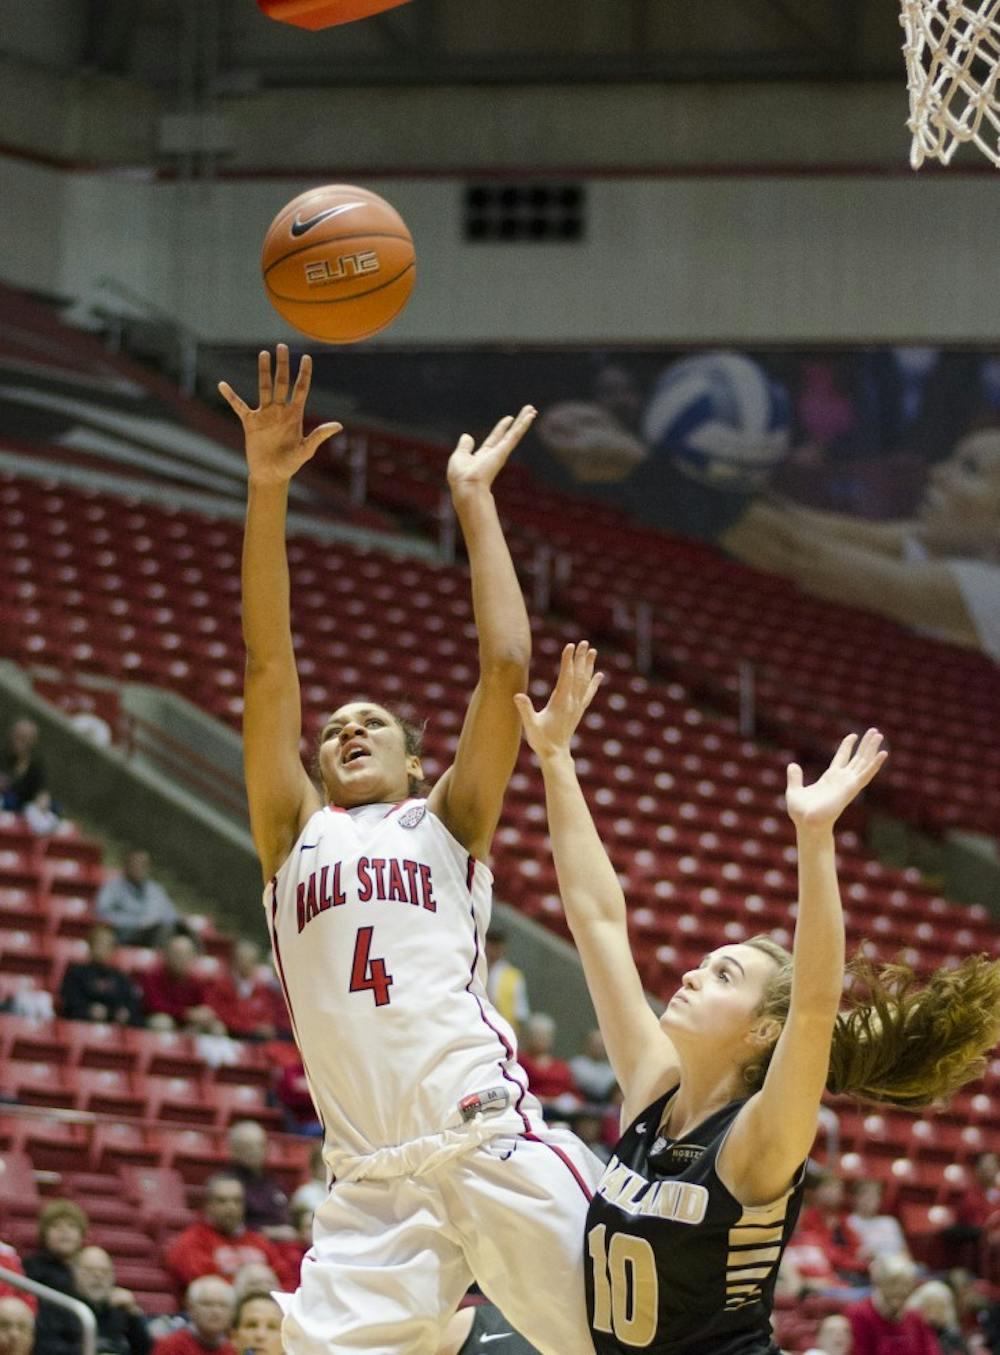 Junior forward Nathalie Fontaine attempts to get a shot during the game against Oakland on Dec. 6 at Worthen Arena. DN PHOTO BREANNA DAUGHERTY